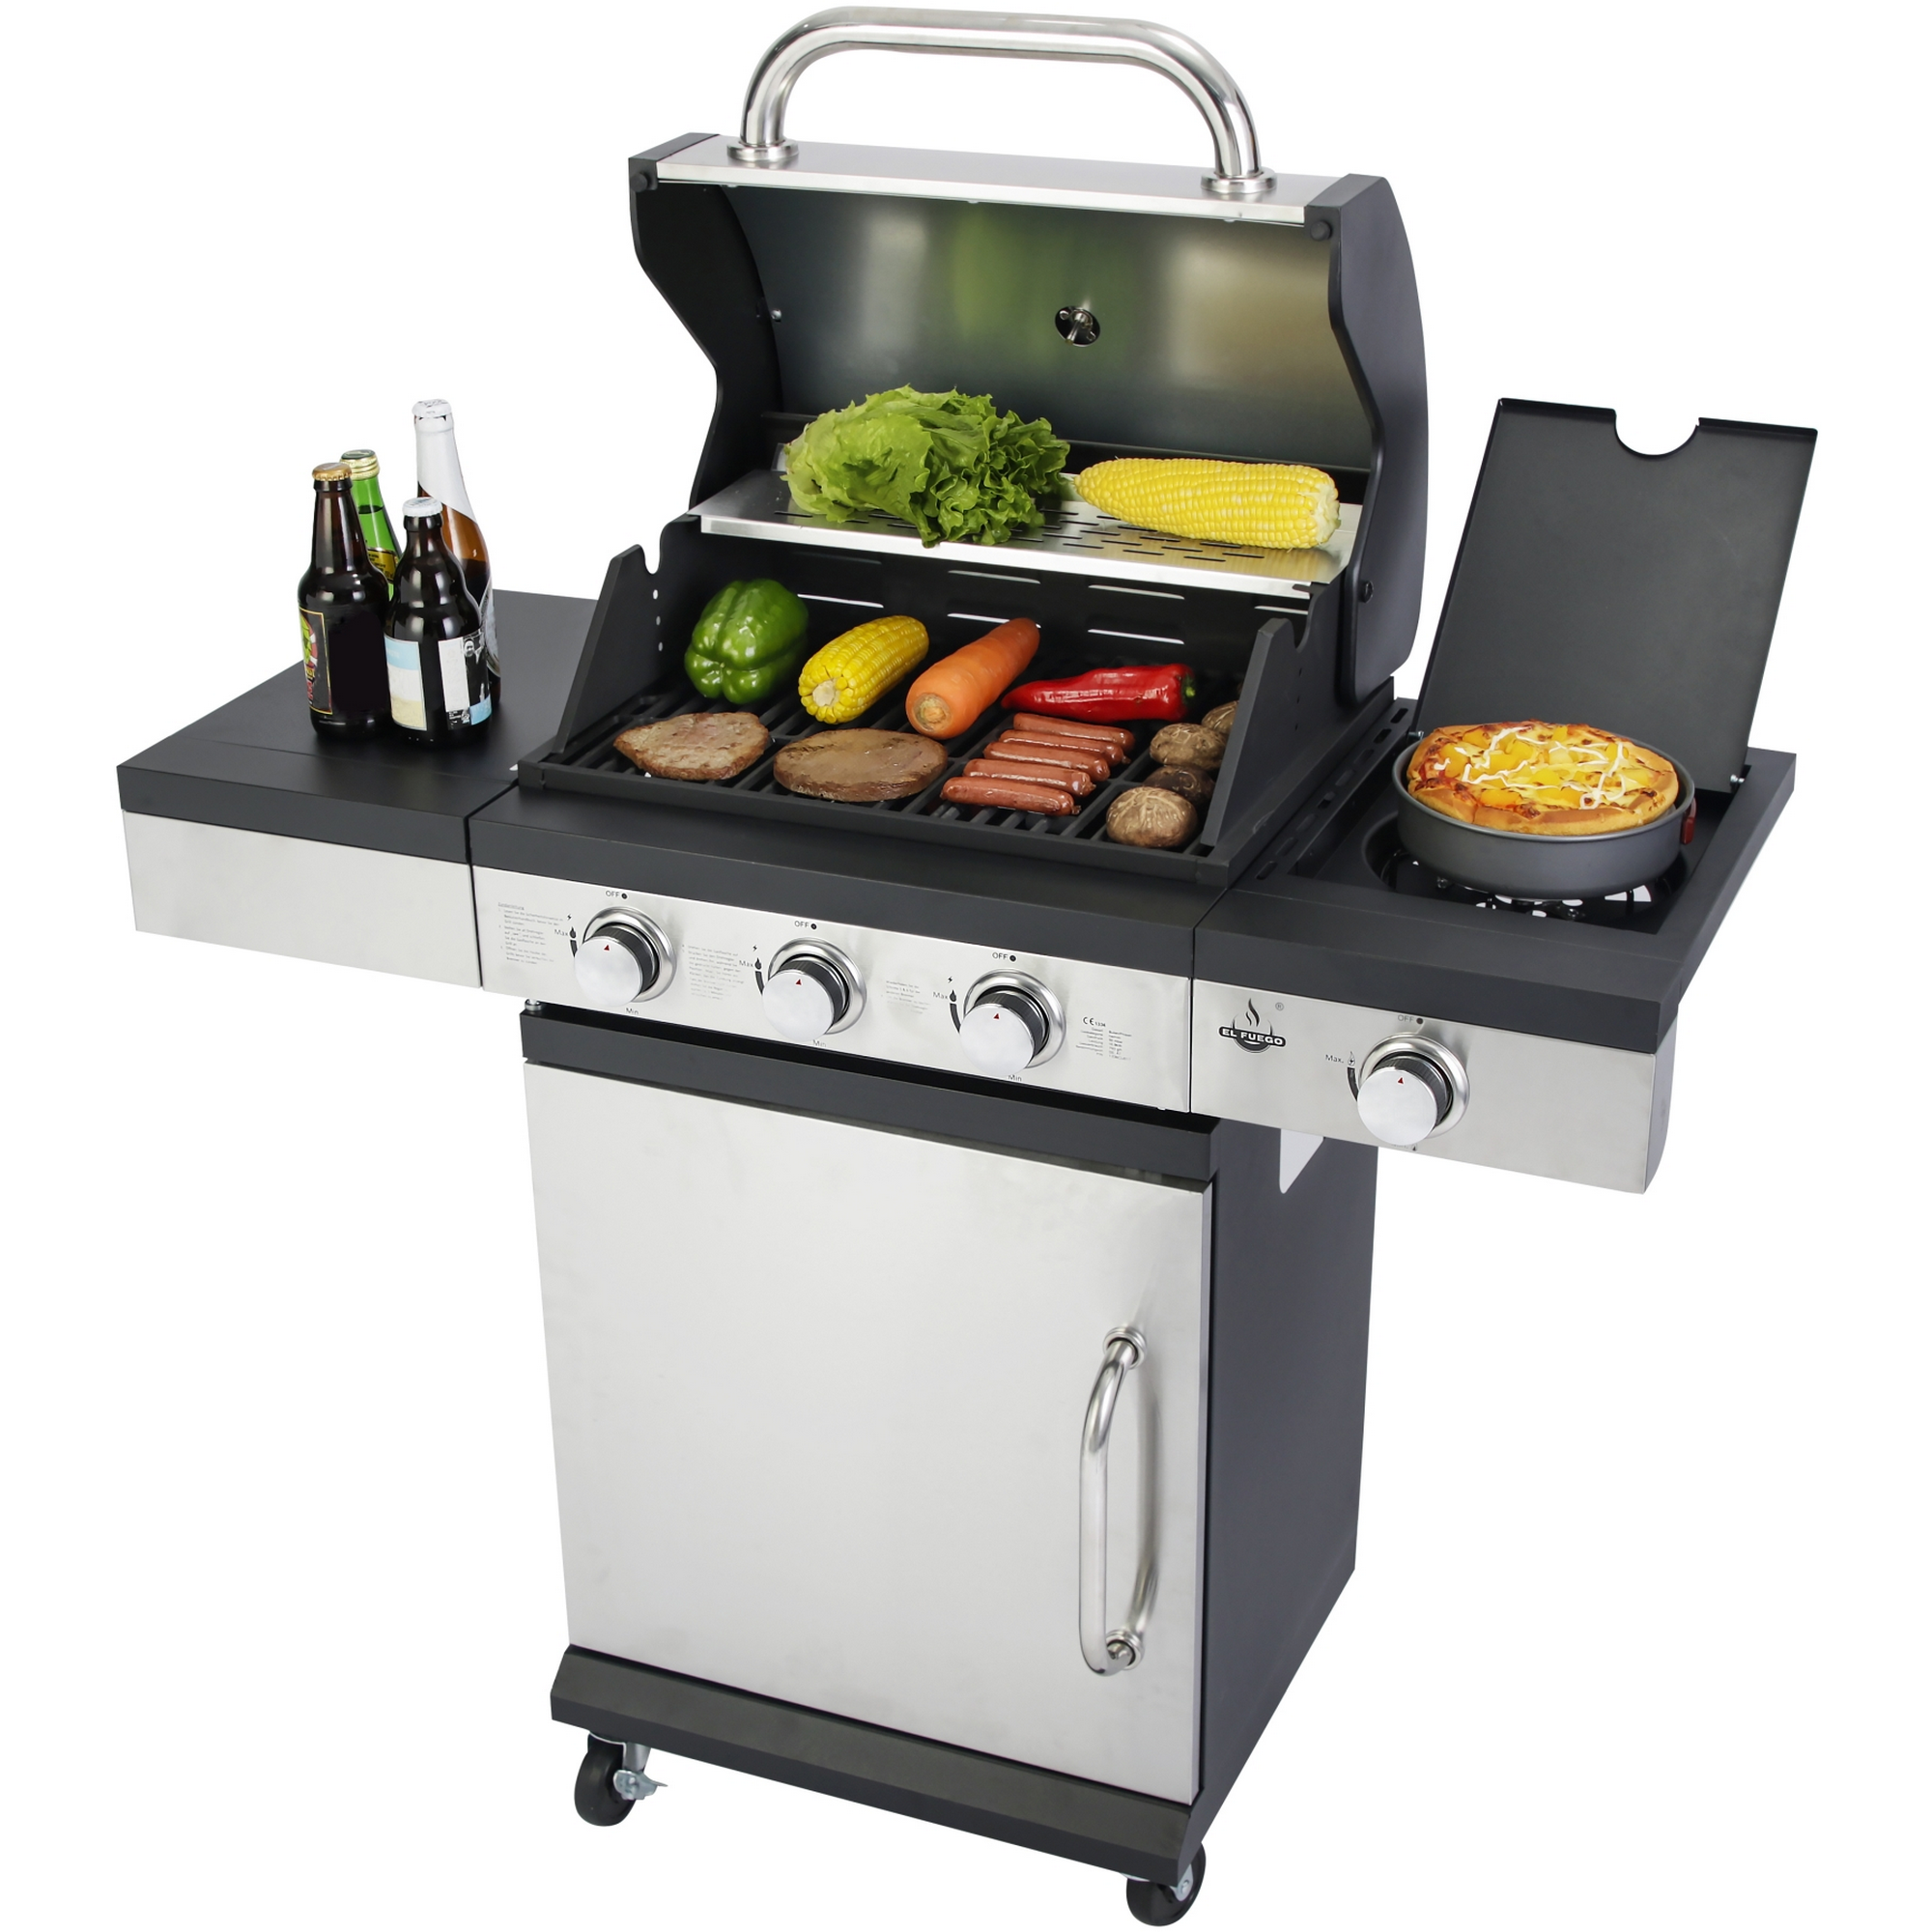 Gasgrill 'San Antonio' silber/schwarz 3+1 Brenner + product picture